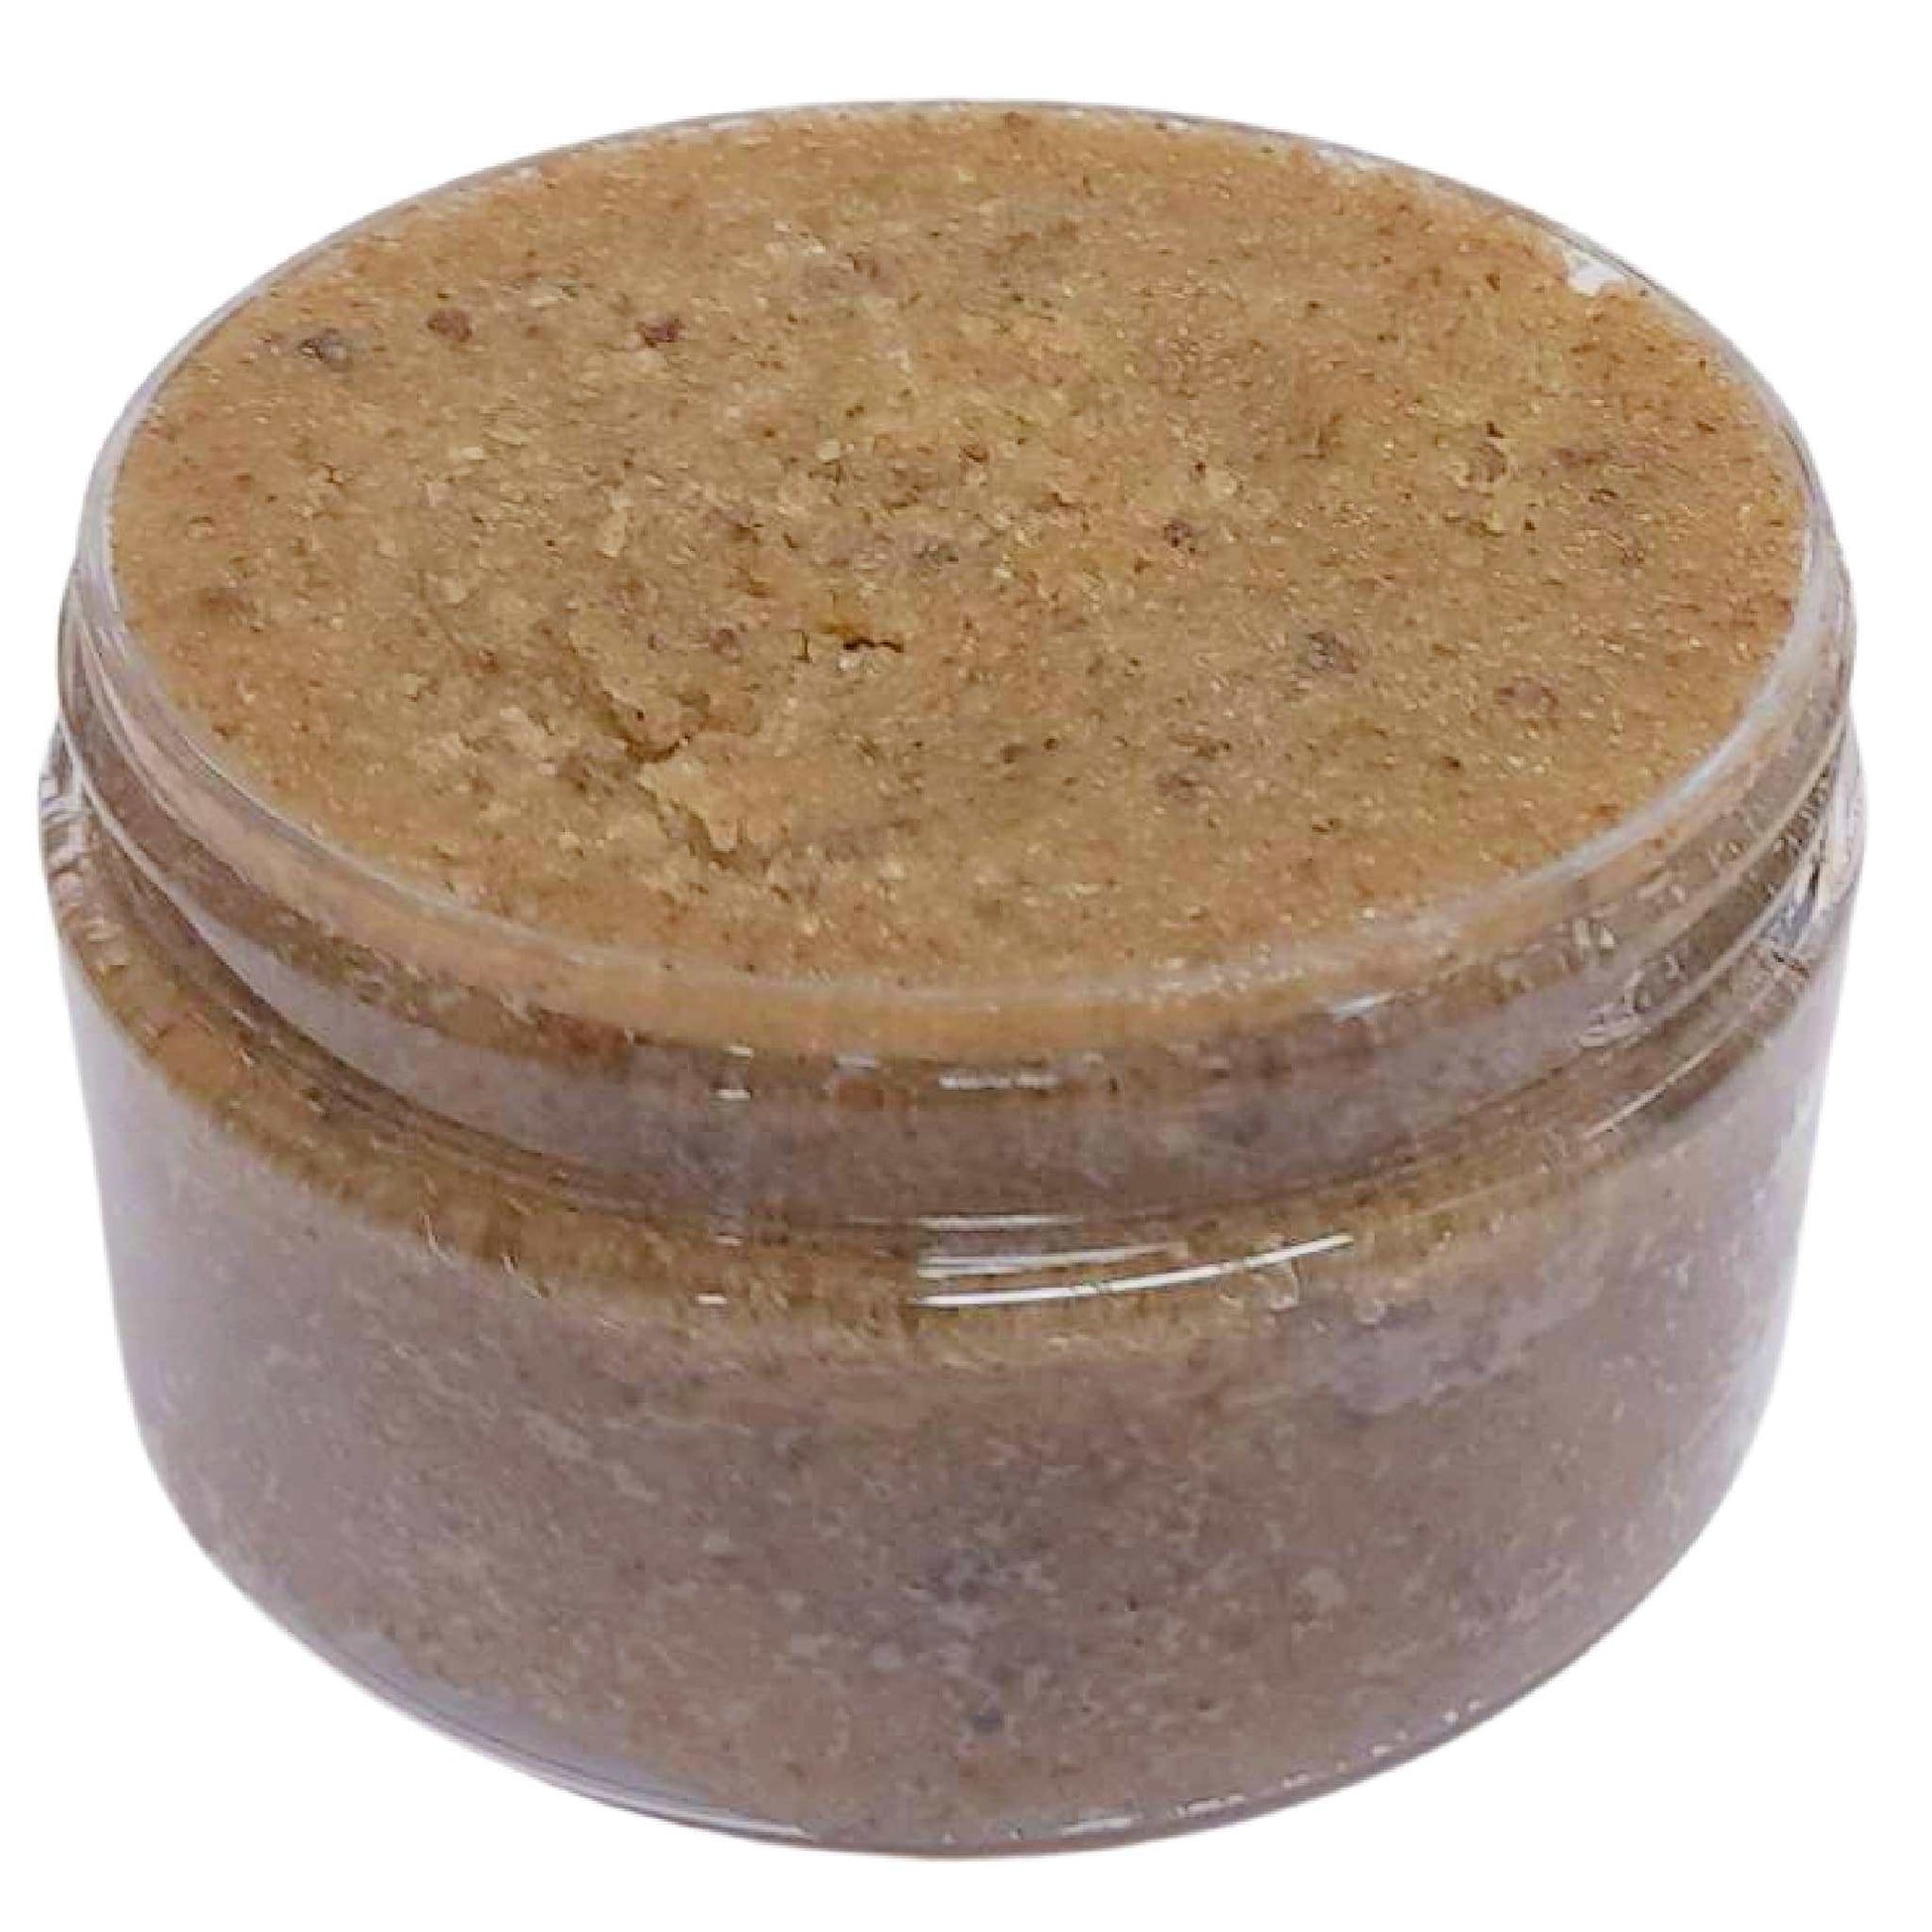 Our Green Tea Chamomile Cupuacu Shea Butter Foot Scrub is the secret to perfect pedicure at home!